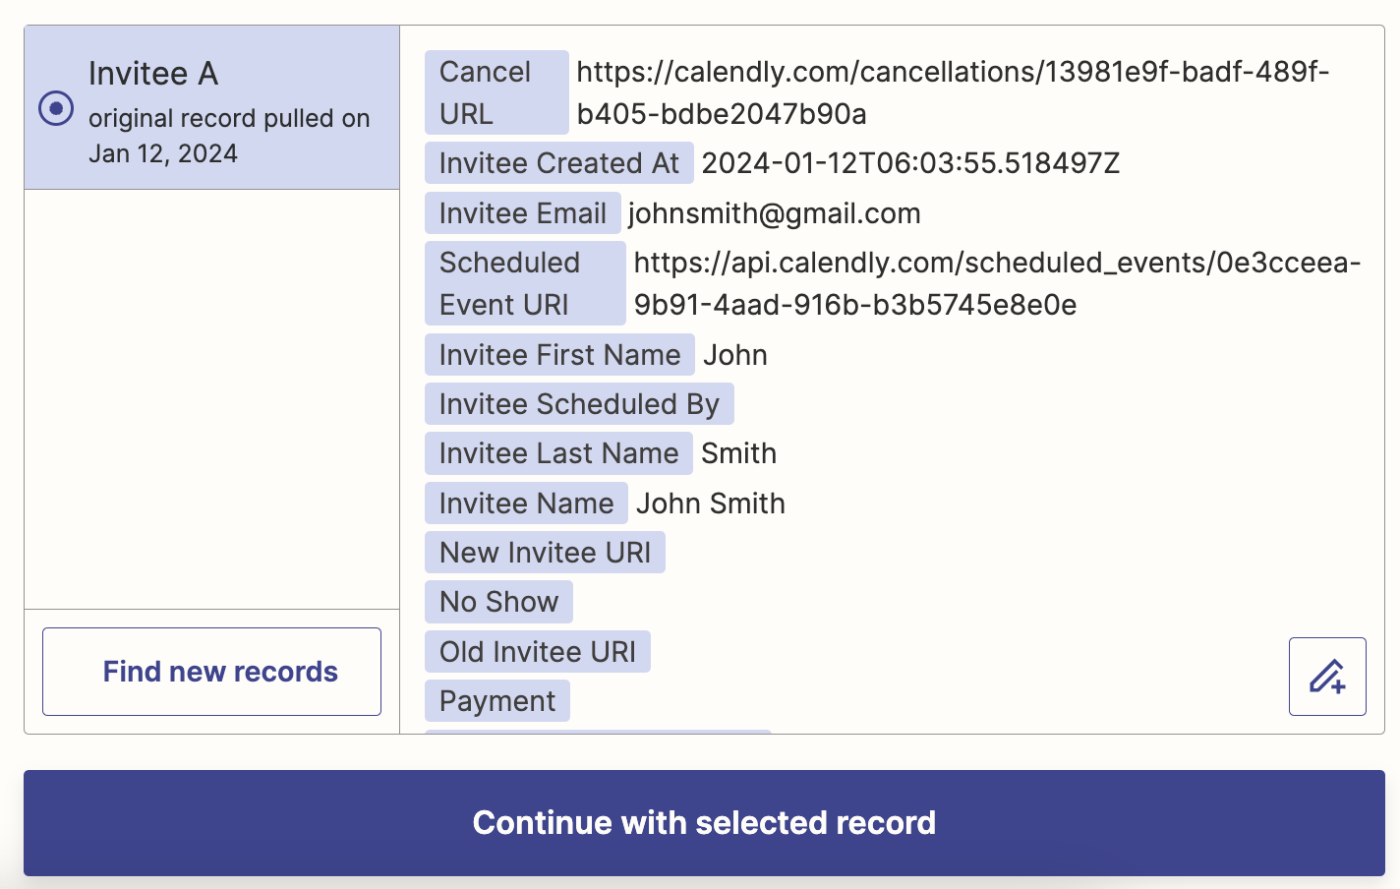 Sample Calendly event data in the Zap editor.